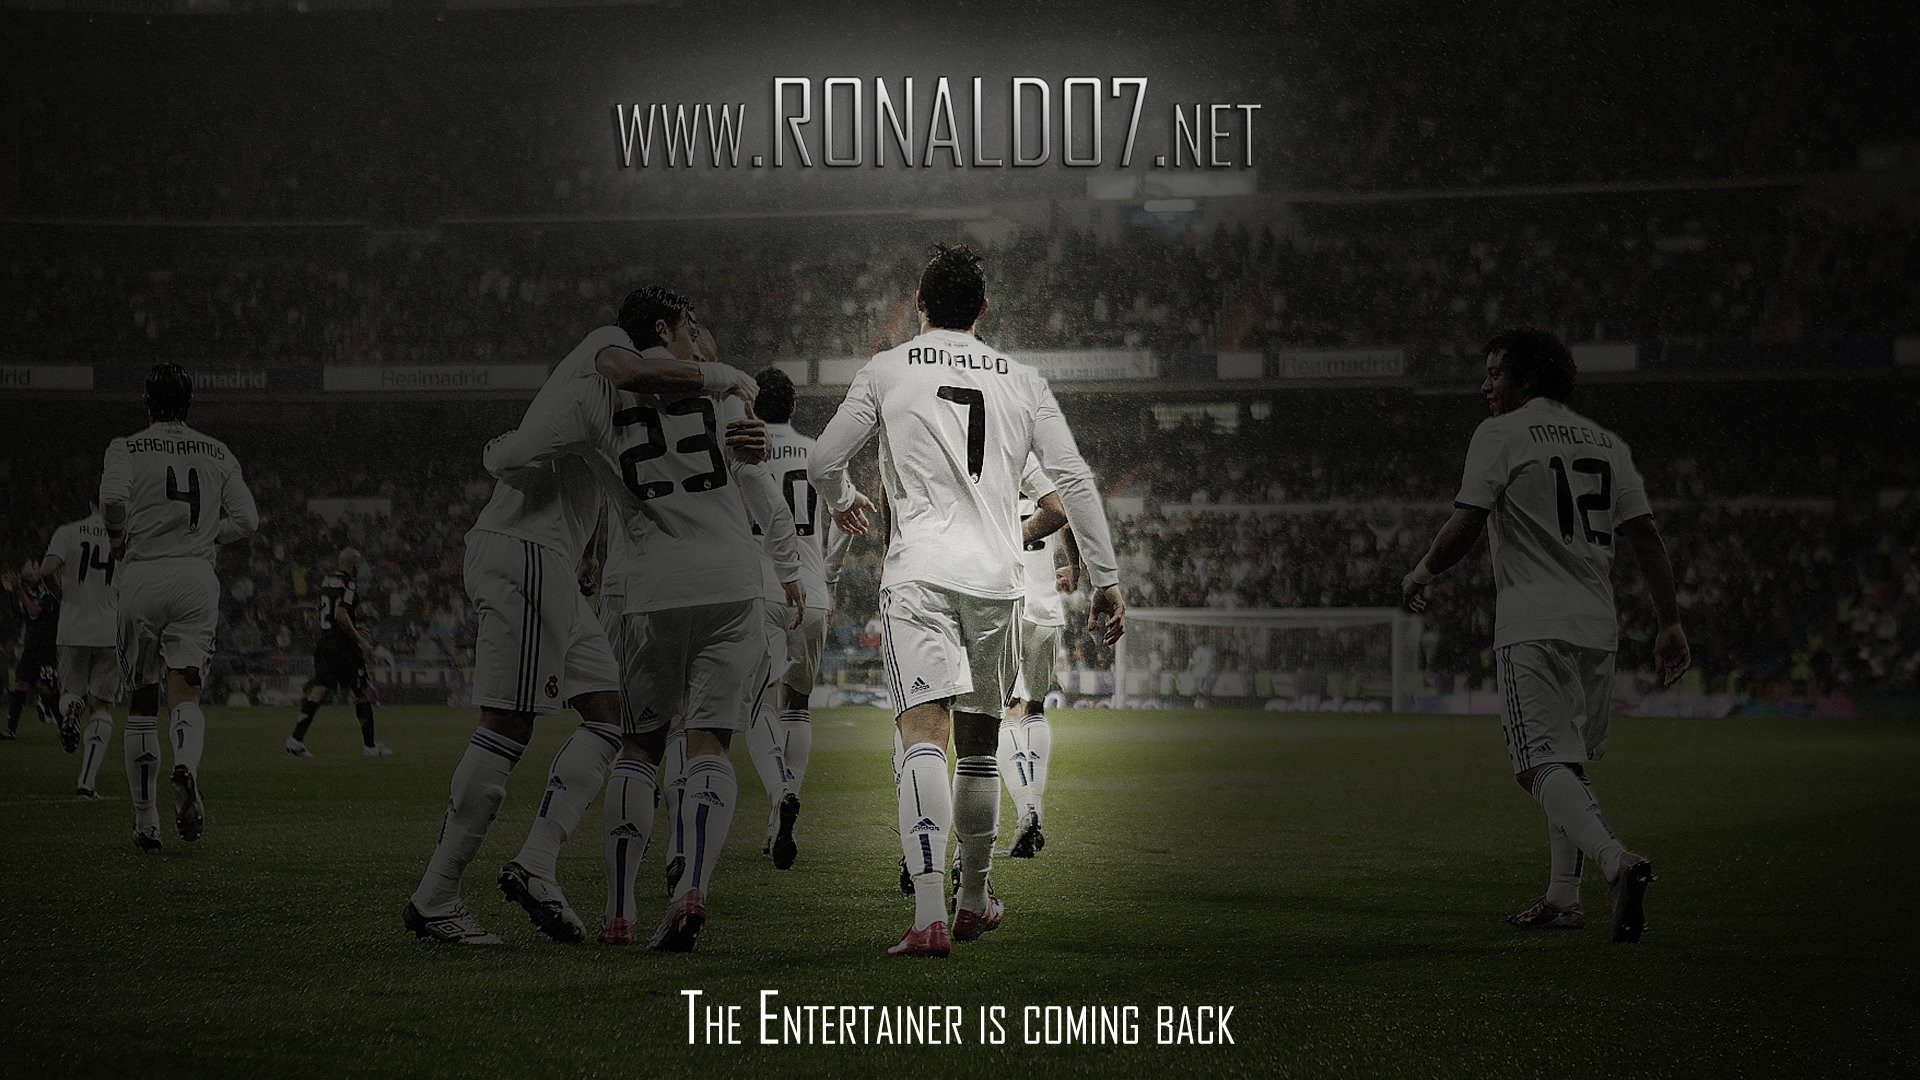 Cristiano Ronaldo wallpaper in Full HD 1920×1080 The entertainer is coming back